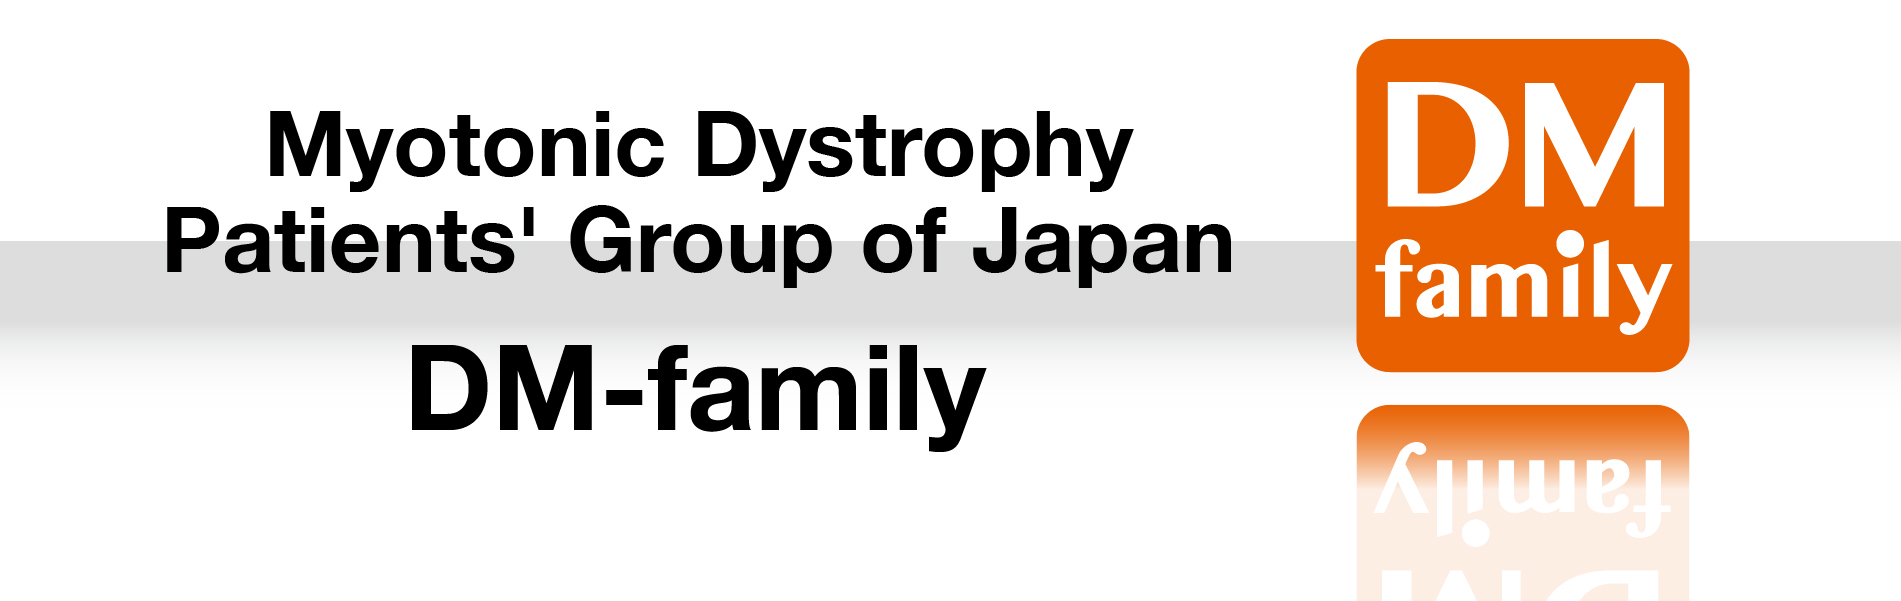 Myotonic Dystrophy Patients’ Group of Japan "DM-family"